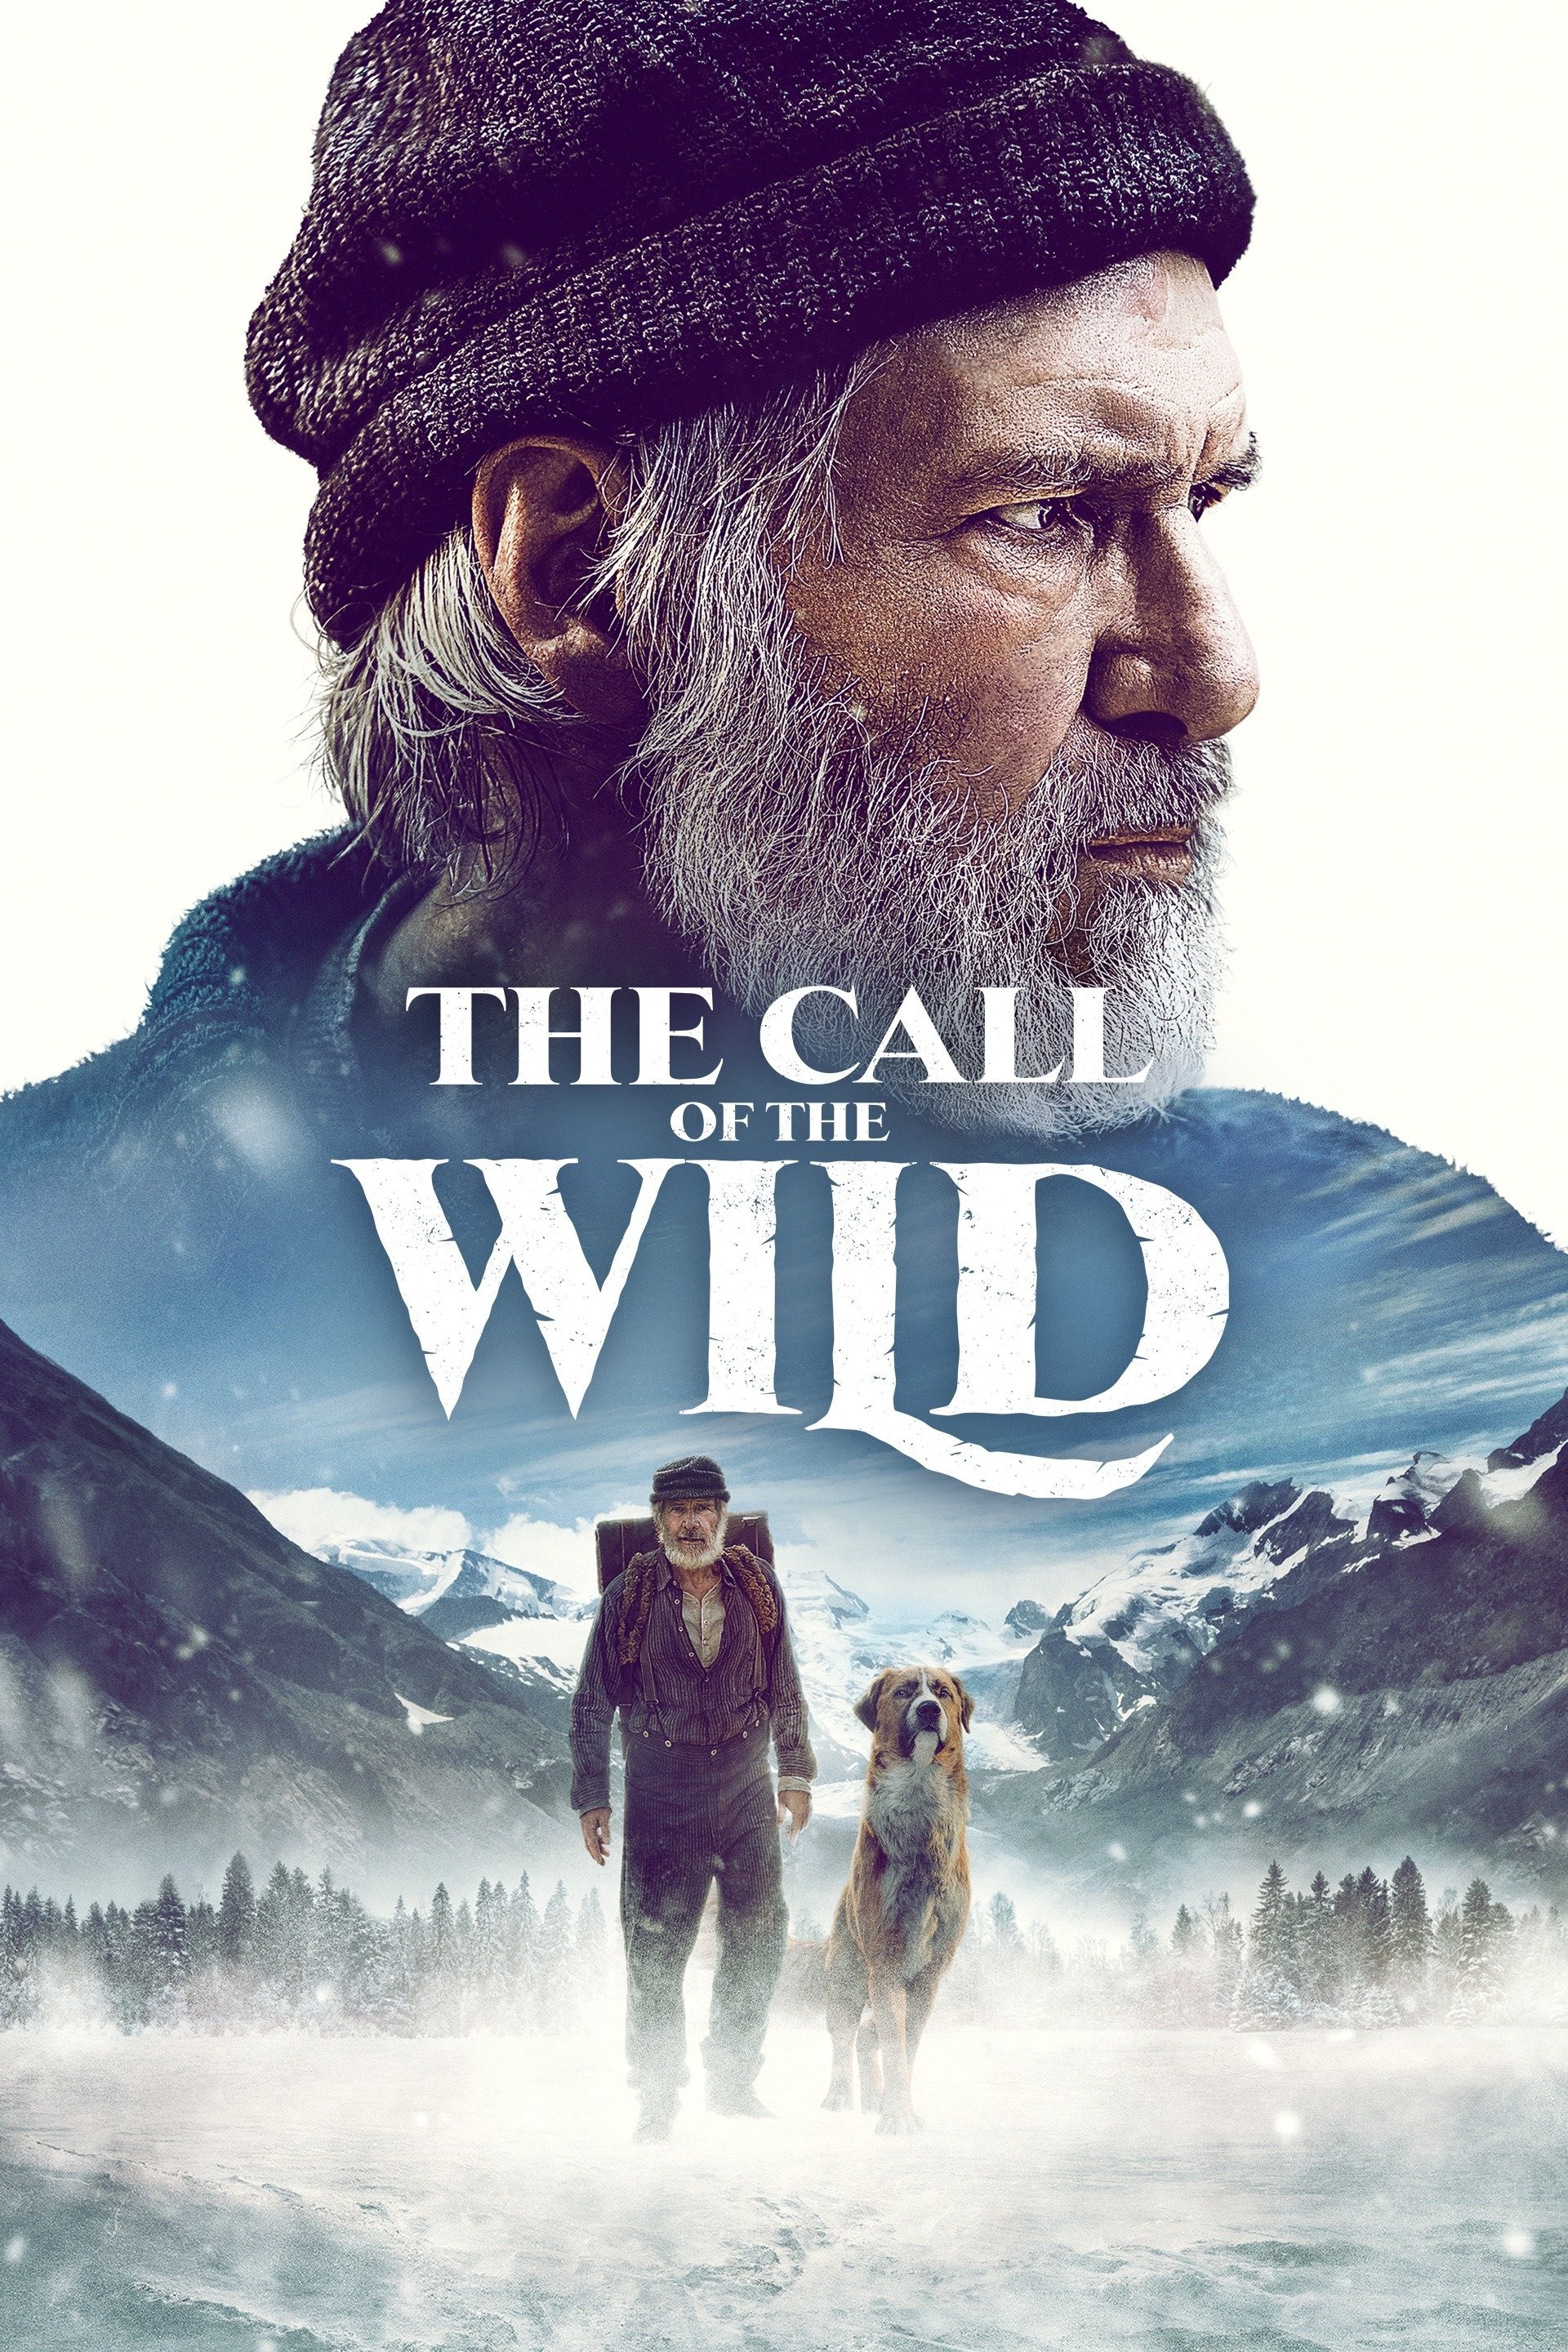 The Hunter: Call of the Wild — Contains Moderate Peril